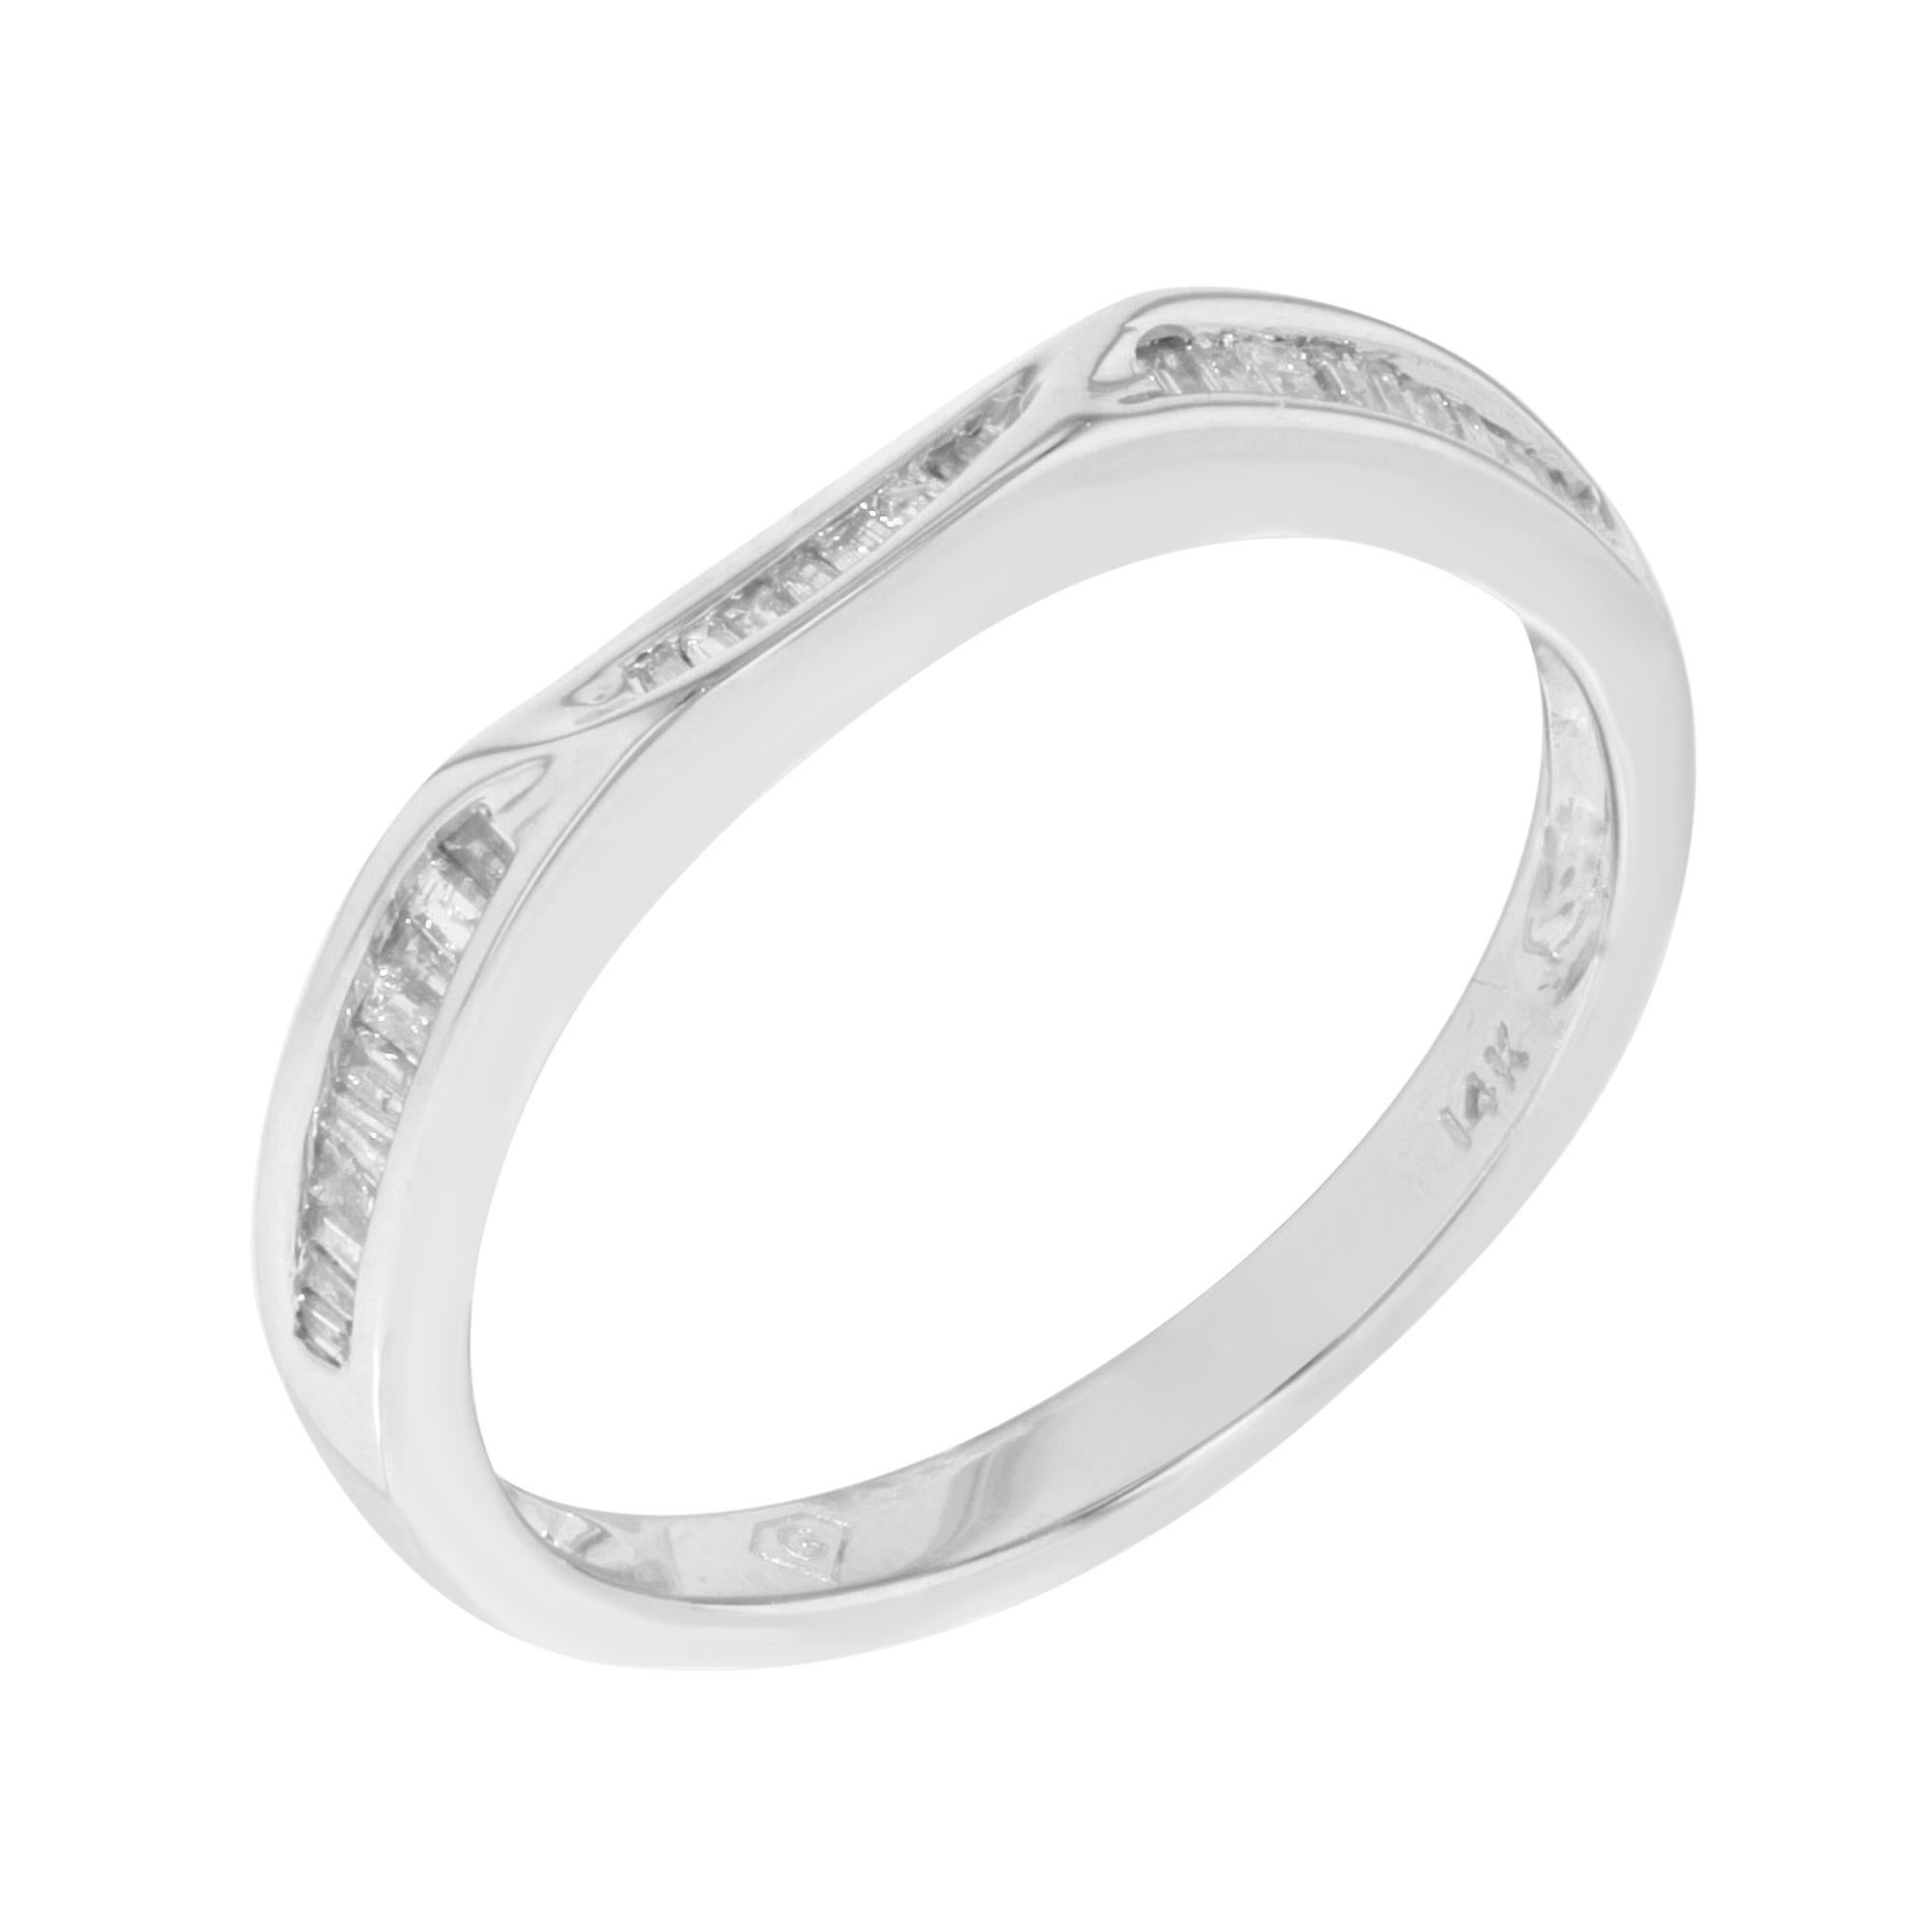 This beautiful petite band features white baguette diamonds lined up to create a faceted passageway that glimmers as it bends around the finger. Crafted in high polished 14k white gold and encrusted with appx. 0.22cttw of diamonds. The size of the